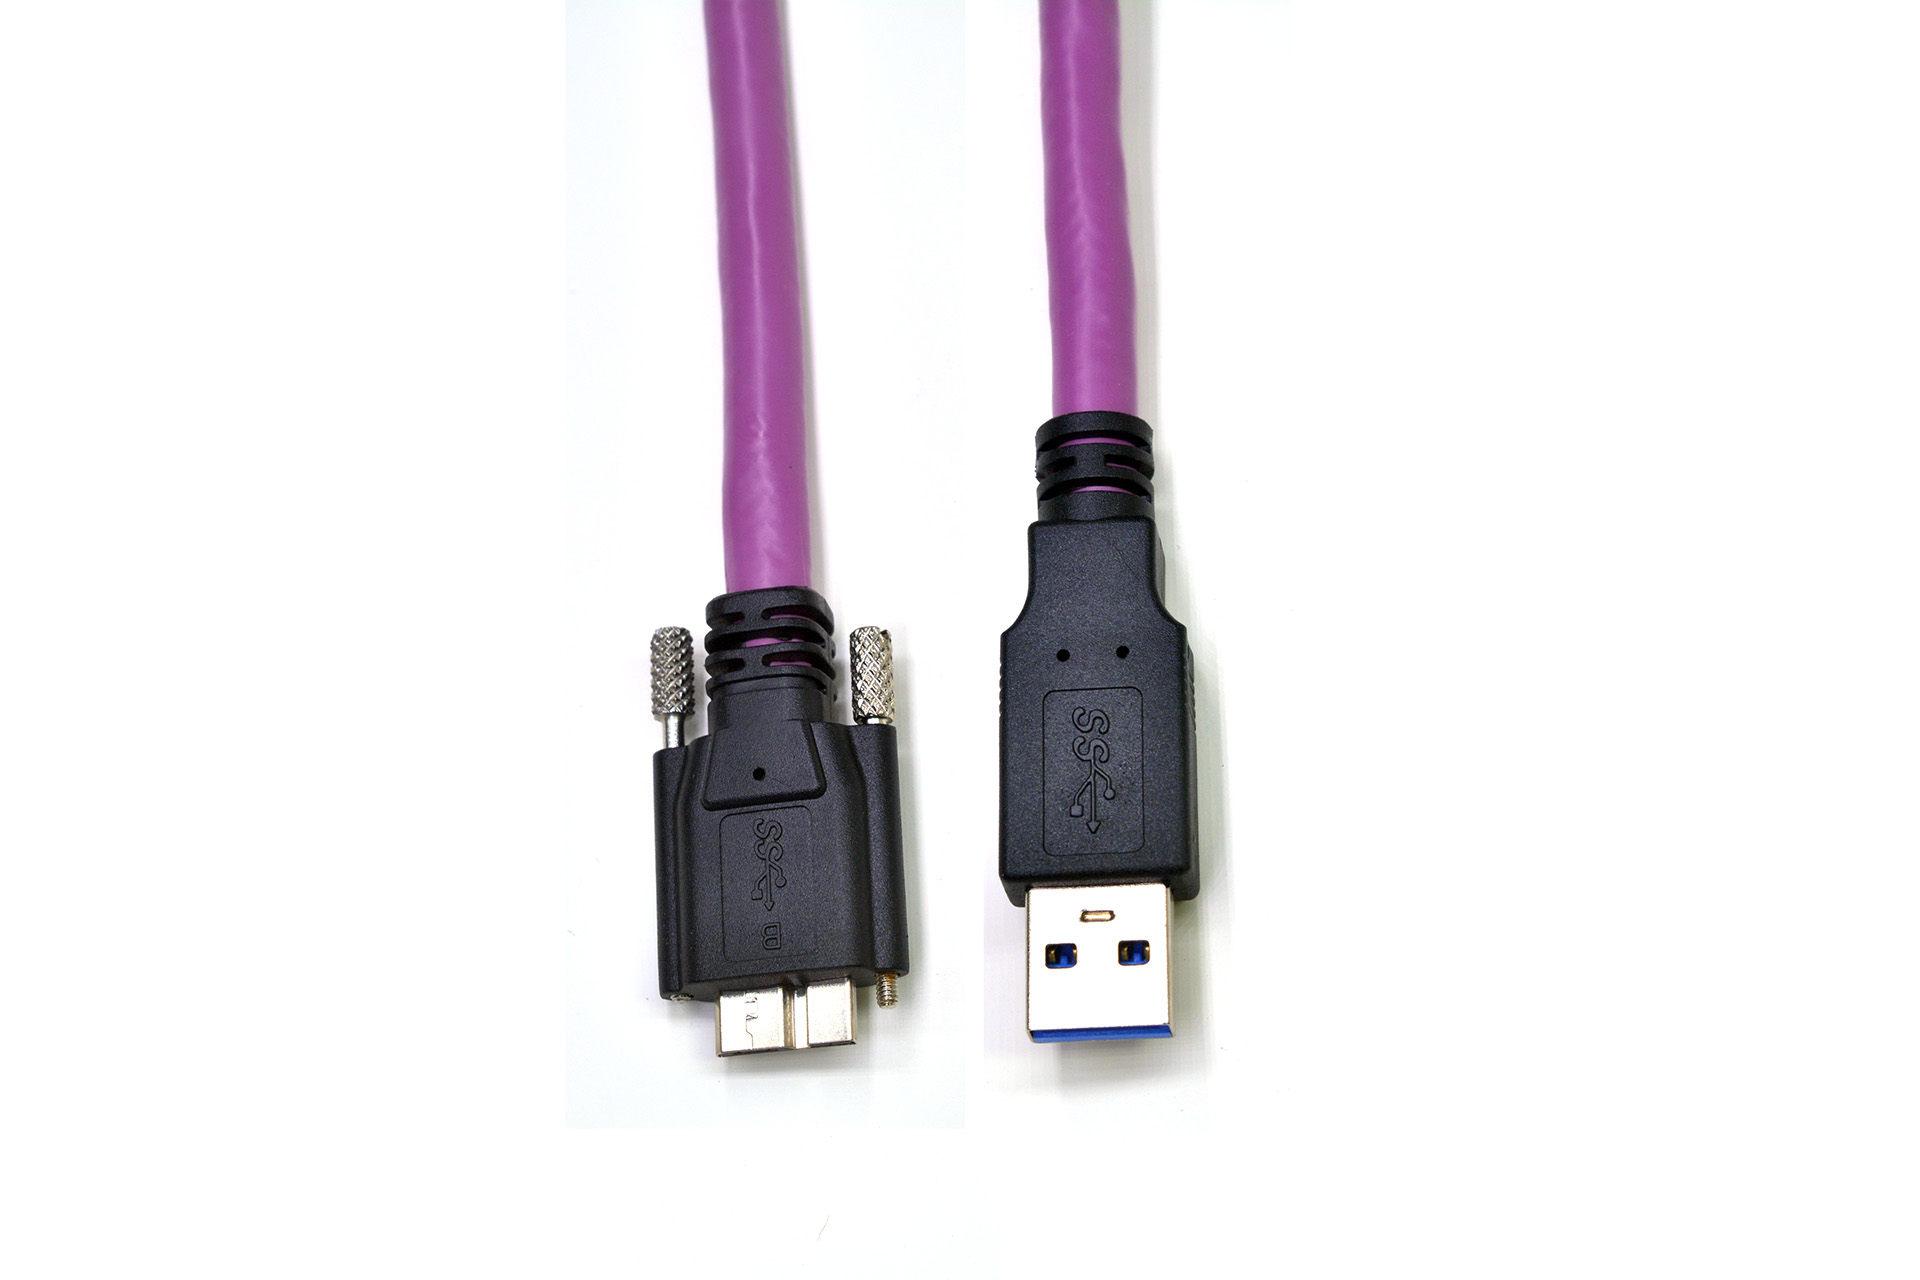 USB3.0 Type-A to Micro-B cable with locking screws